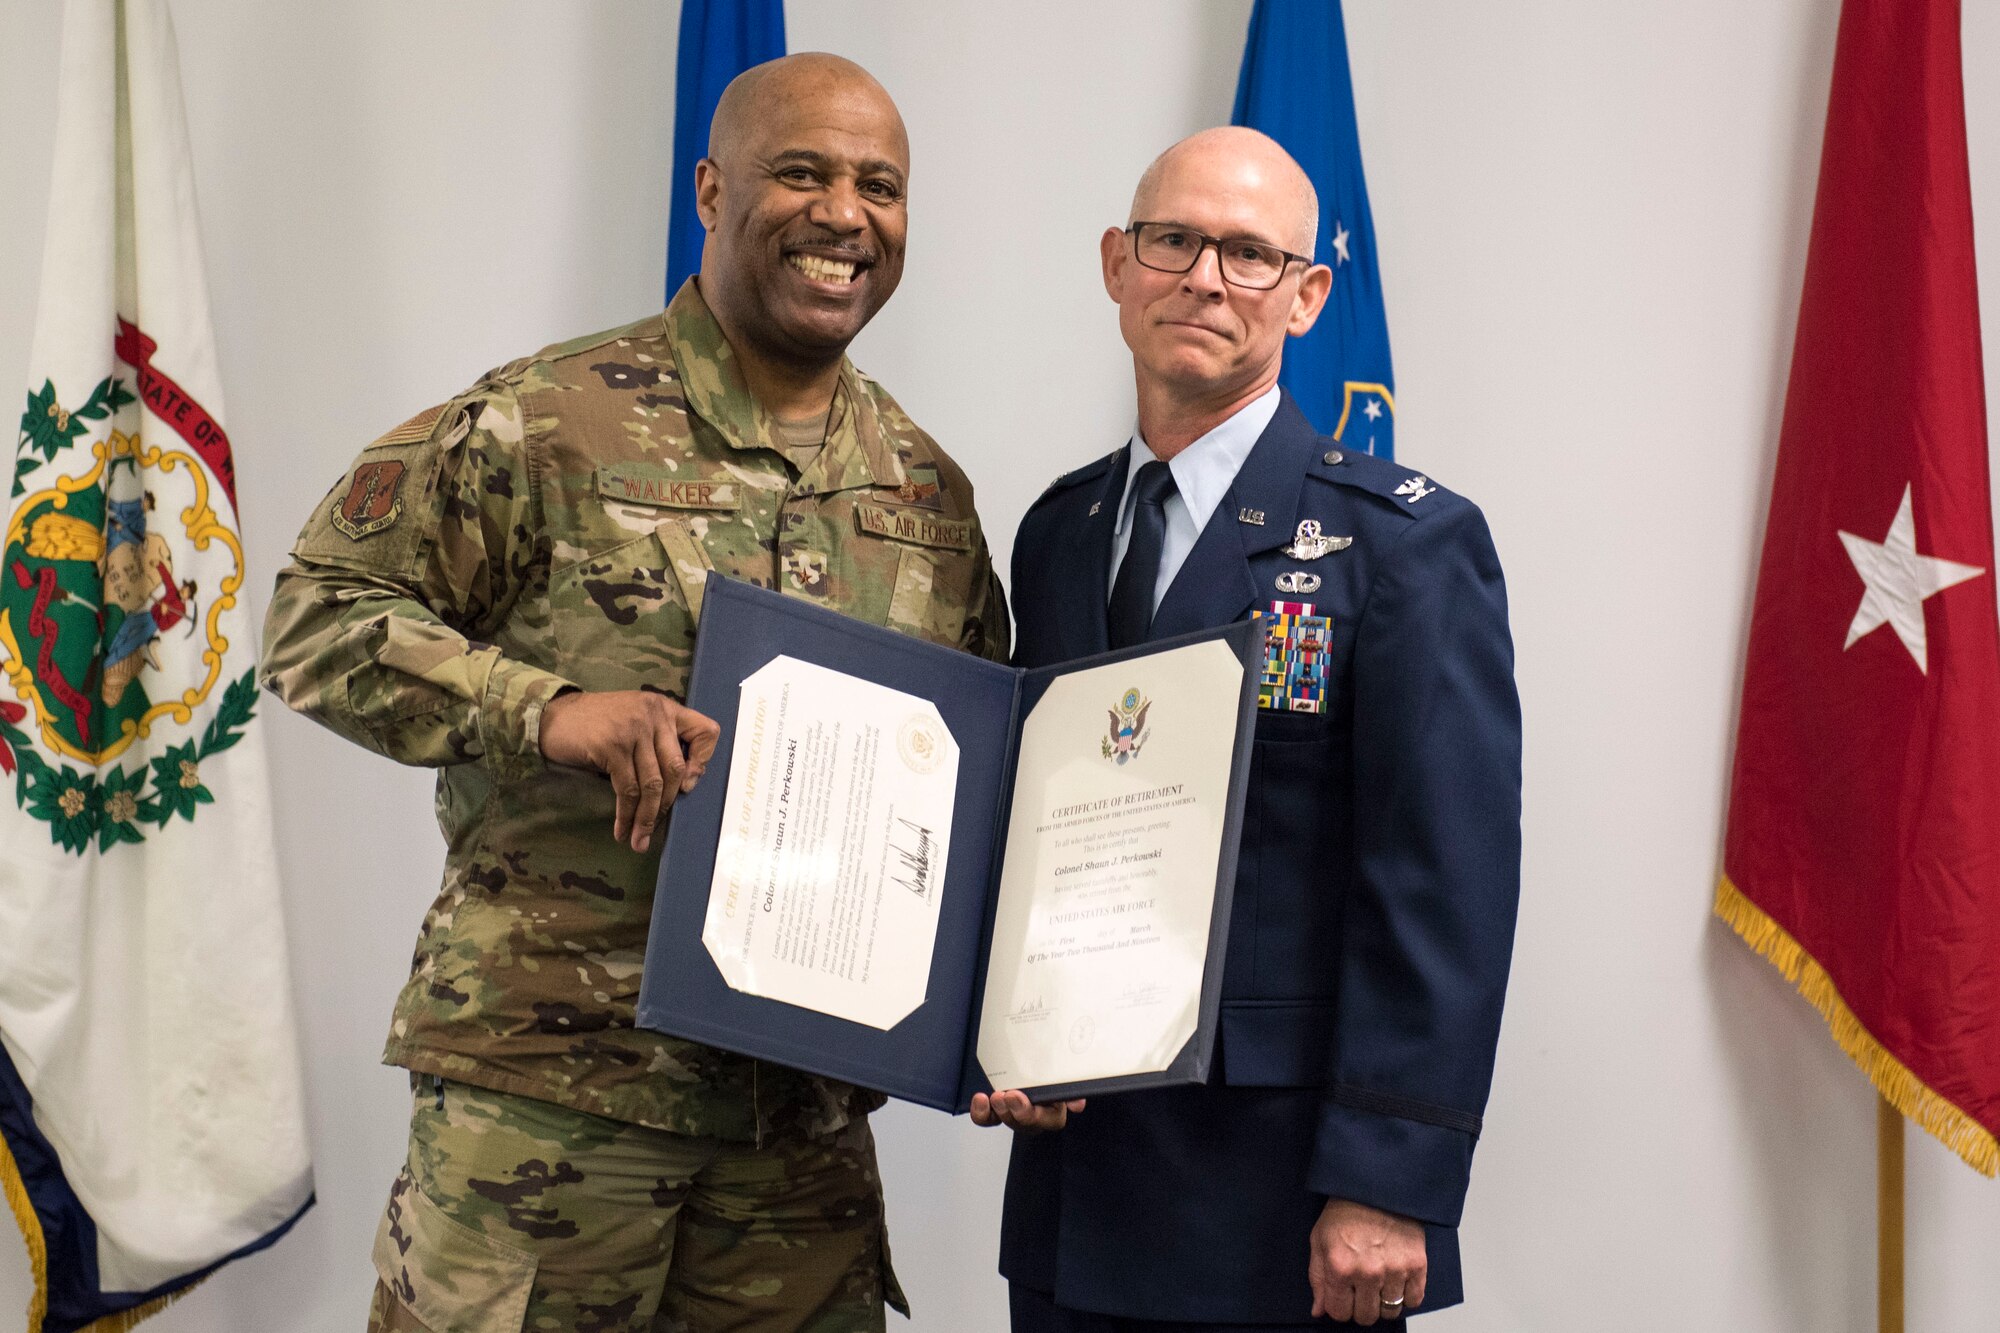 Brig. Gen. Christopher Walker, the West Virginia National Guard’s Assistant Adjutant General- Air, presents Col. Shaun Perkowski with his certificate of retirement during Perkowski’s retirement ceremony. Perkowski was the 167th AW commander from October 2013- October 2018. (U.S. Air National Guard photo by Tech. Sgt. Jodie Witmer)